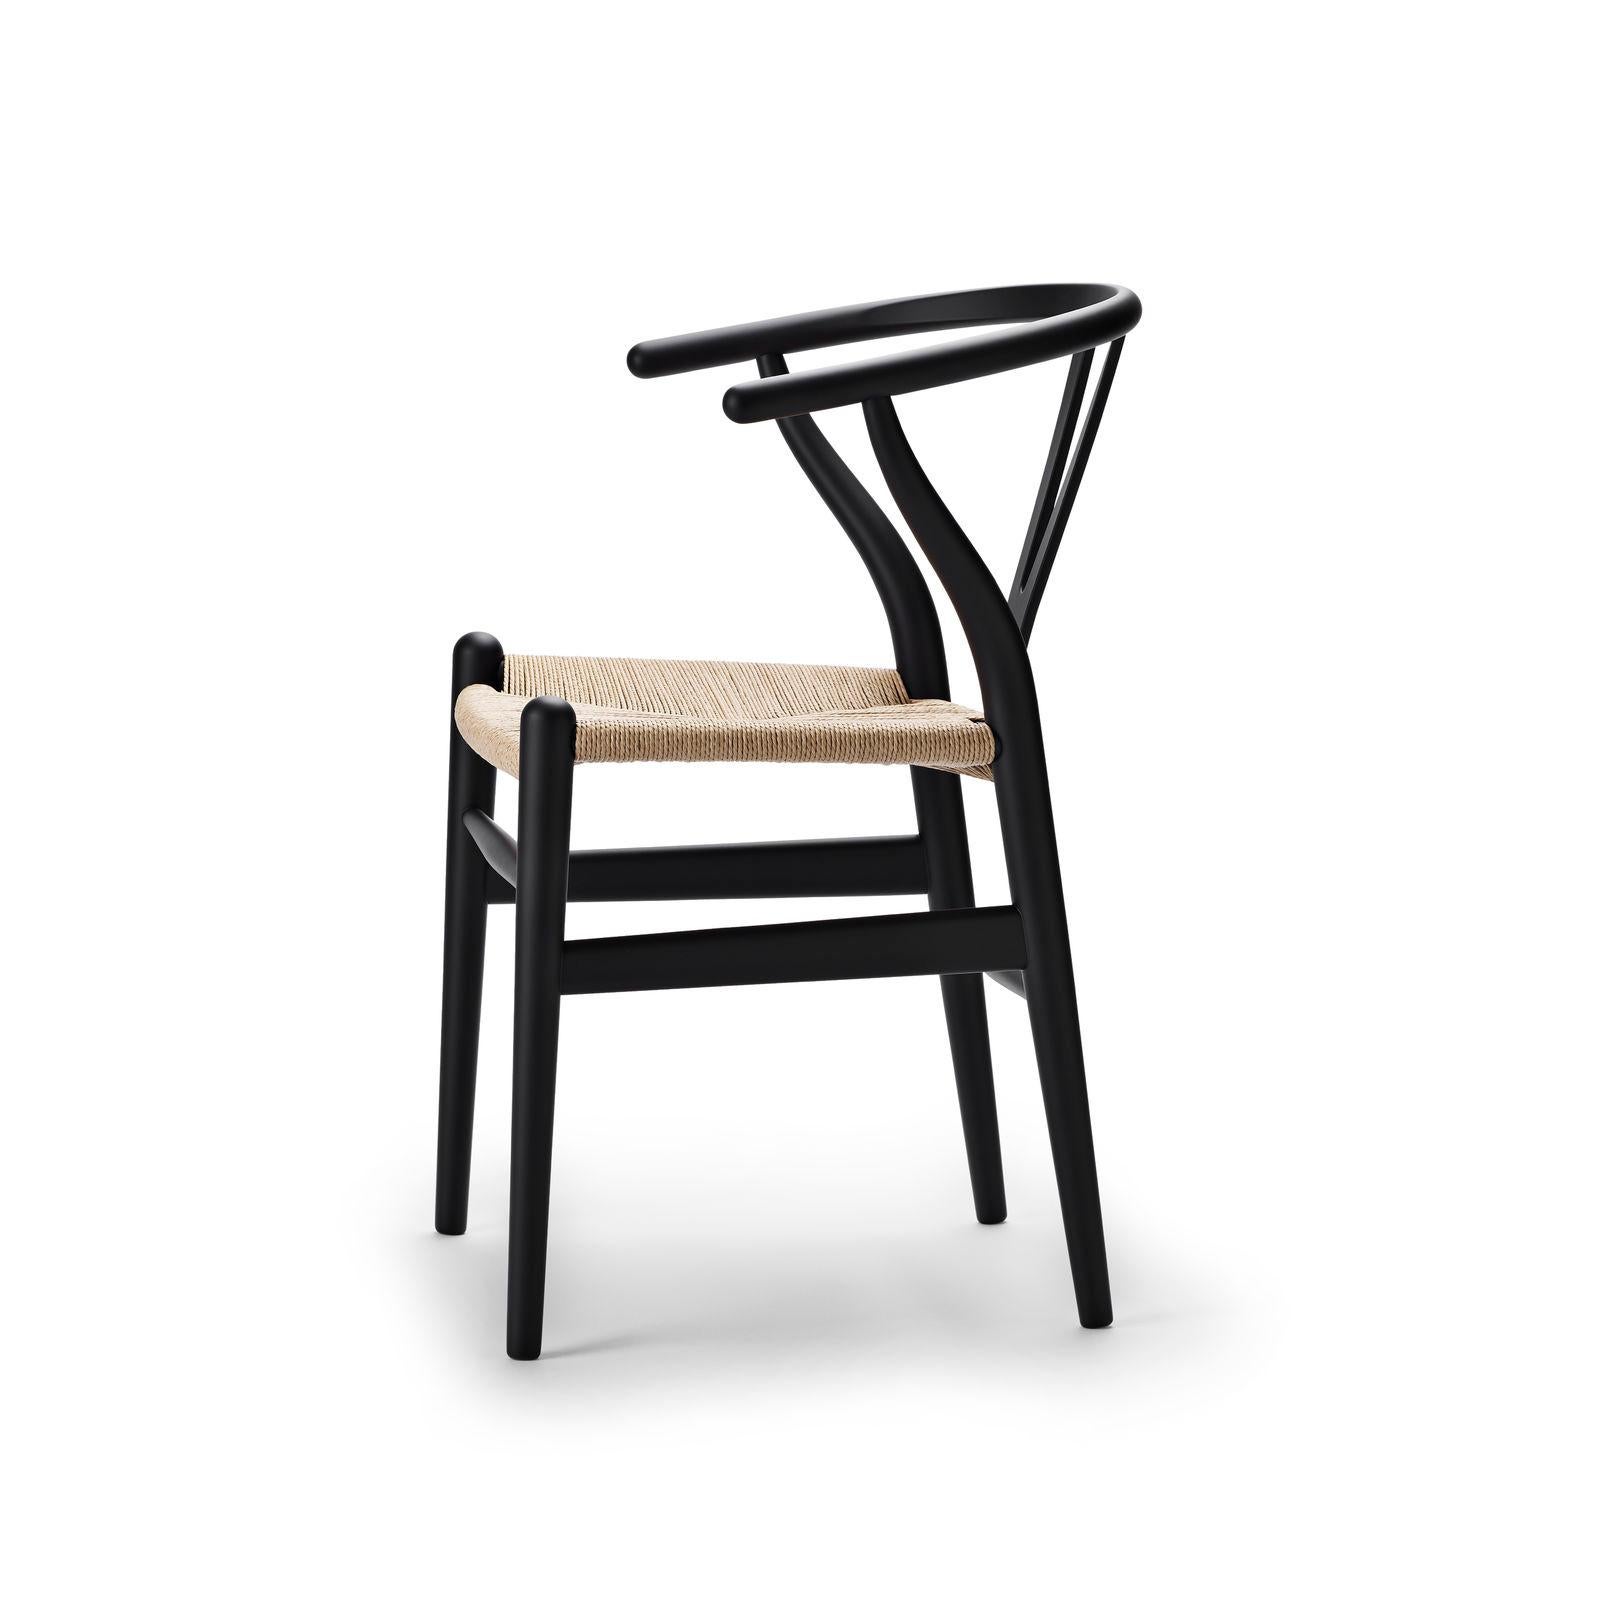 The very first model Hans J. Wegner designed exclusively for Carl Hansen & Søn in 1949, the CH24 or Wishbone Chair, has been in continuous production since its introduction in 1950.